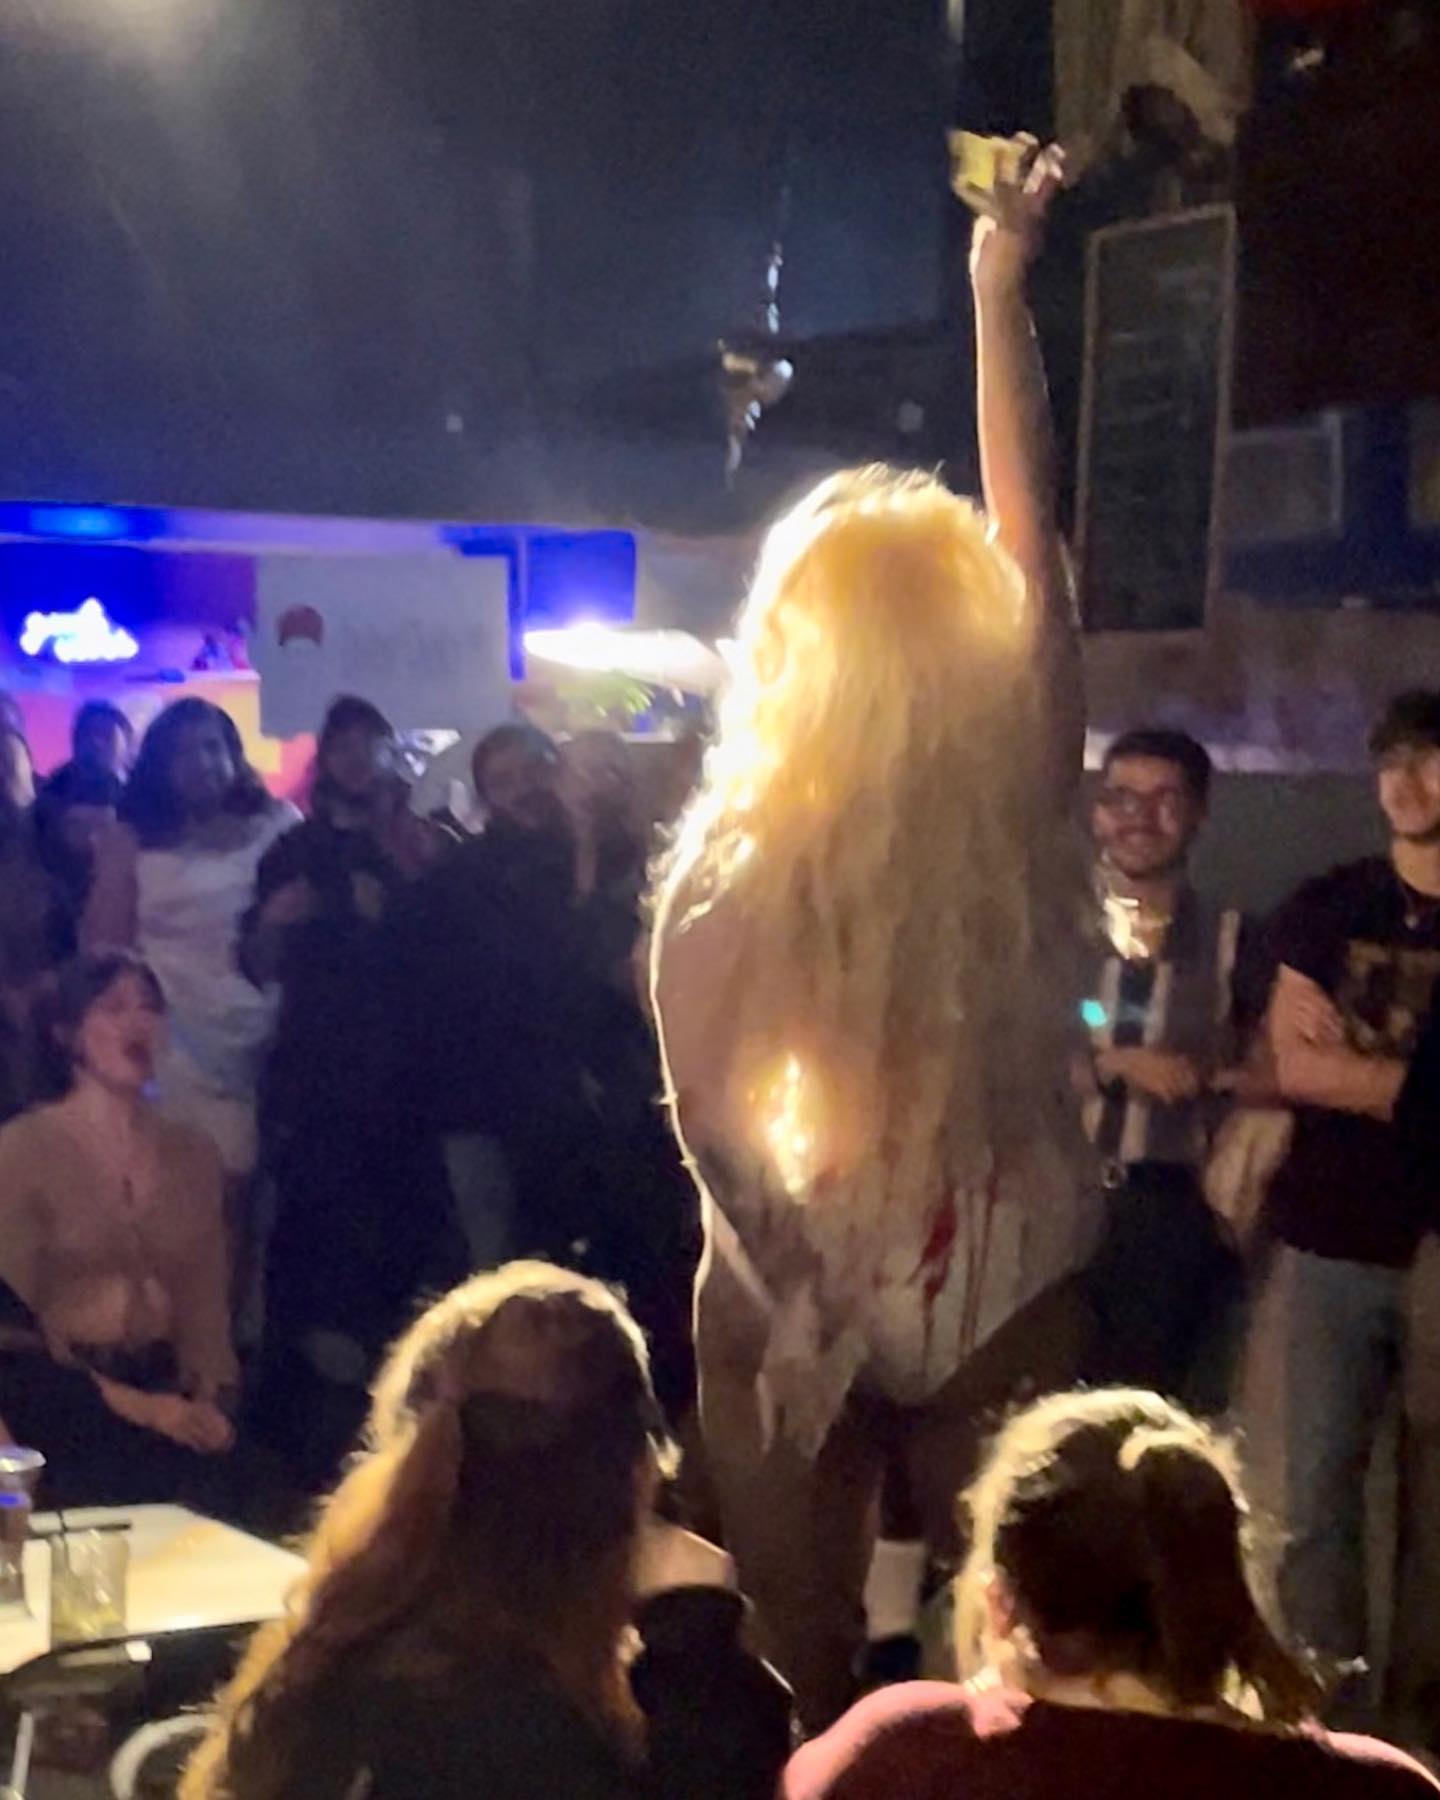 baby’s first performance! 🦇

i finally got the  opportunity to put myself out there & perform in front of an audience in drag! i’ve fantasized about this moment since i was 12 😭 i was so terrified, especially since I’m new to the area & I don’t know anyone, but everyone was so welcoming & the crowd was 🔥

side note: i made $33 in tips & fell on my ass a total of 3 times.. which matches my tattoo (333) so that’s very cool 🫡

tldr i’m emotional tonight went so incredibly well i love my life 🖤

#drag #localdrag #dragartist #beaconny #hudsonvalley